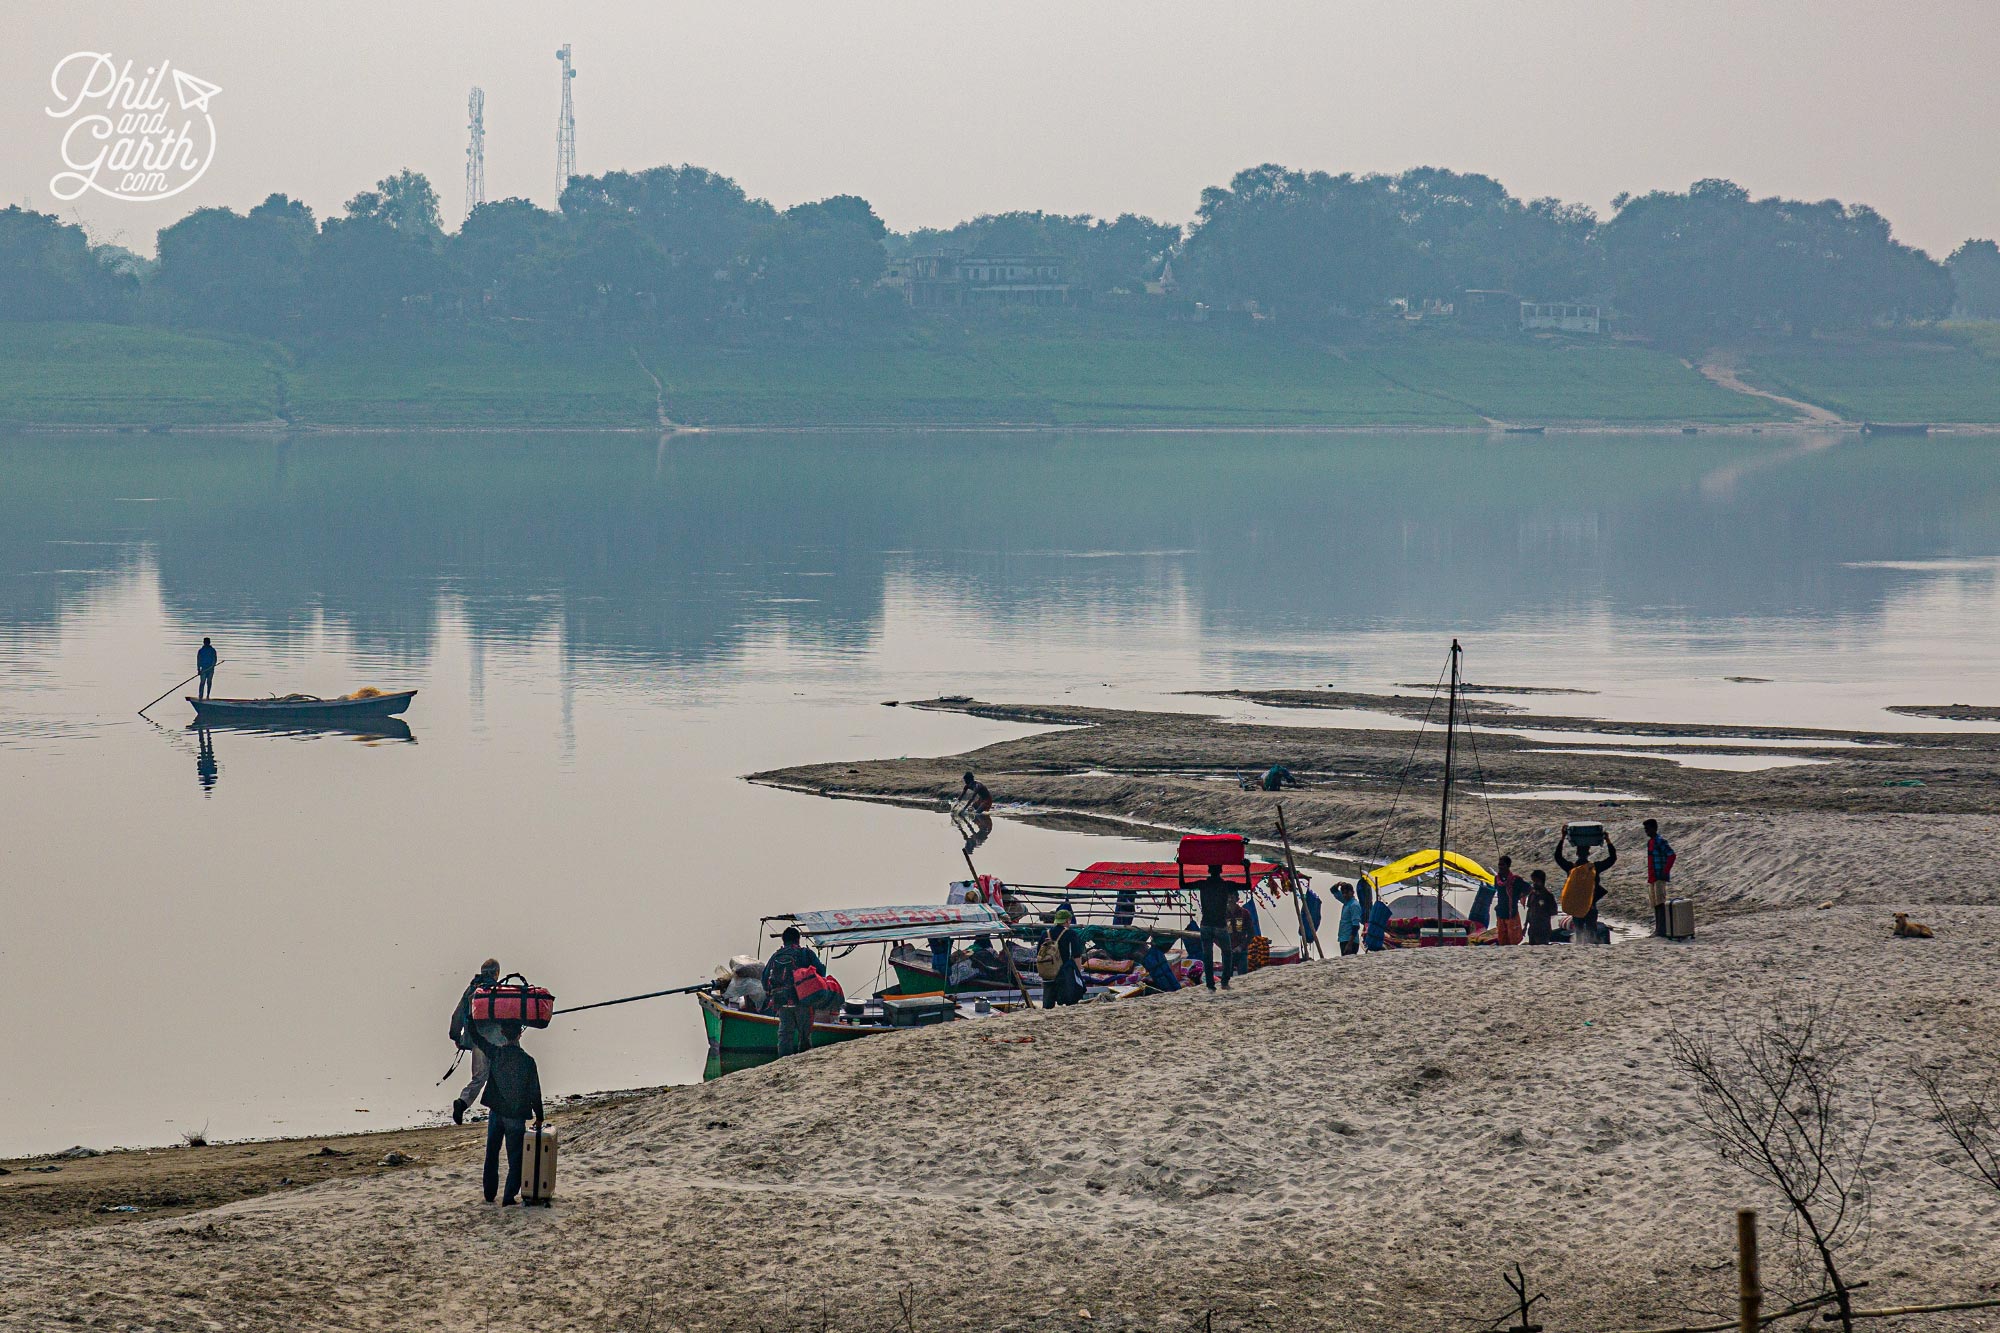 Boarding our boats at the Bhualpur Shivala Ghat